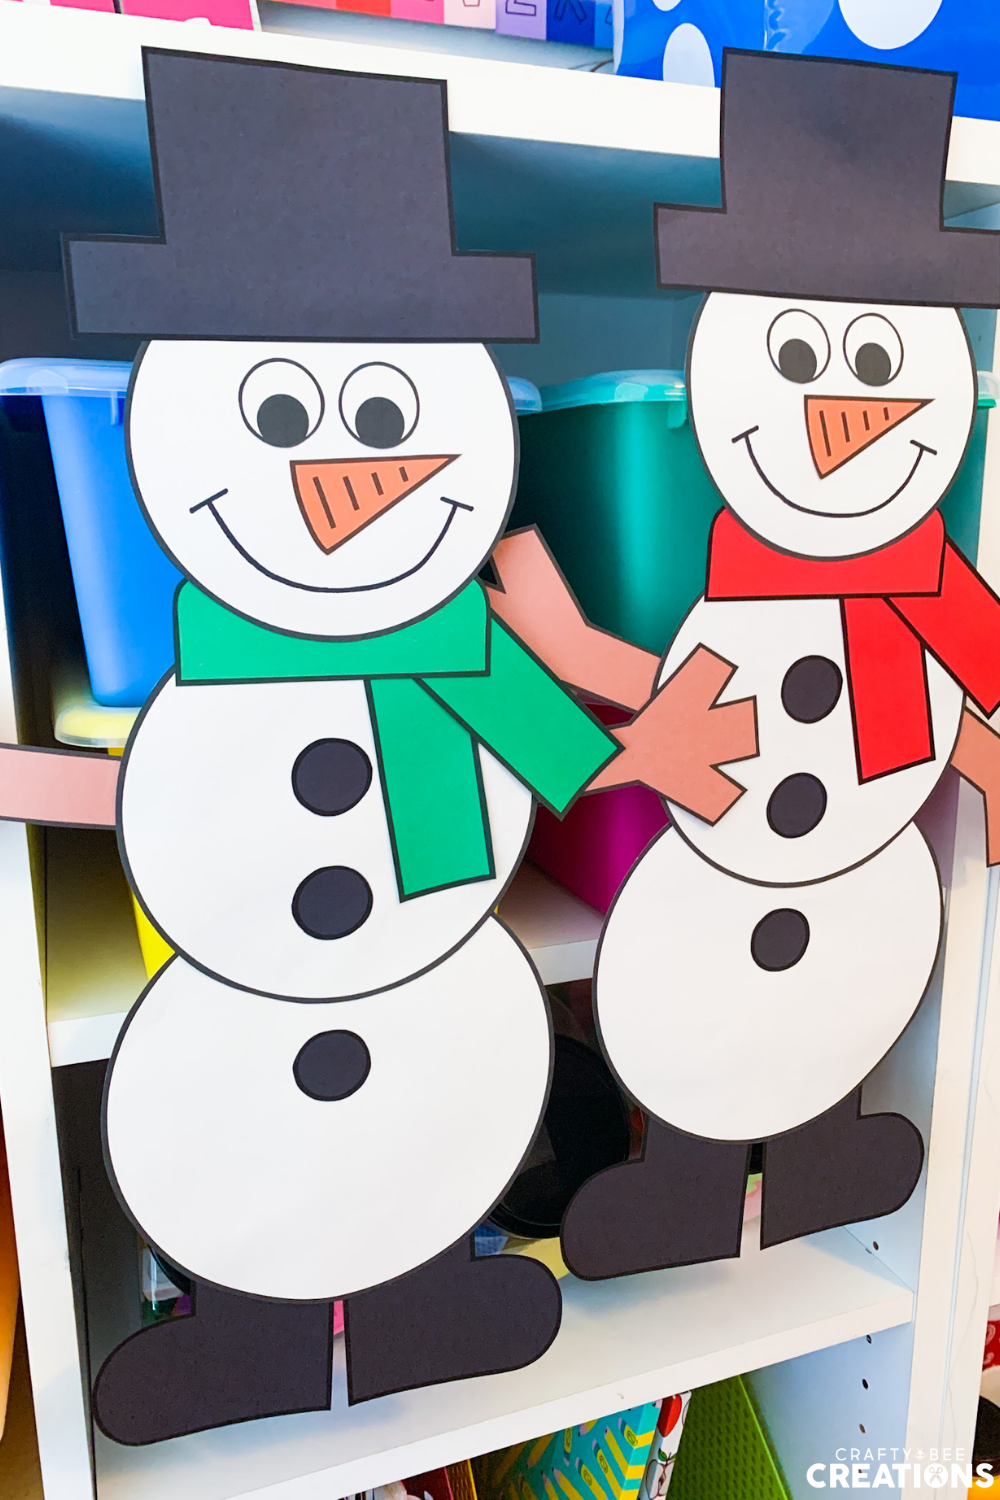 Two snowmen crafts are hung on a shelf where blue and green bins are kept. The snowmen have orange carrot noses, black hats, black buttons and brown stick arms. One is wearing a red scarf and the other has a green scarf. They are also wearing black boots.